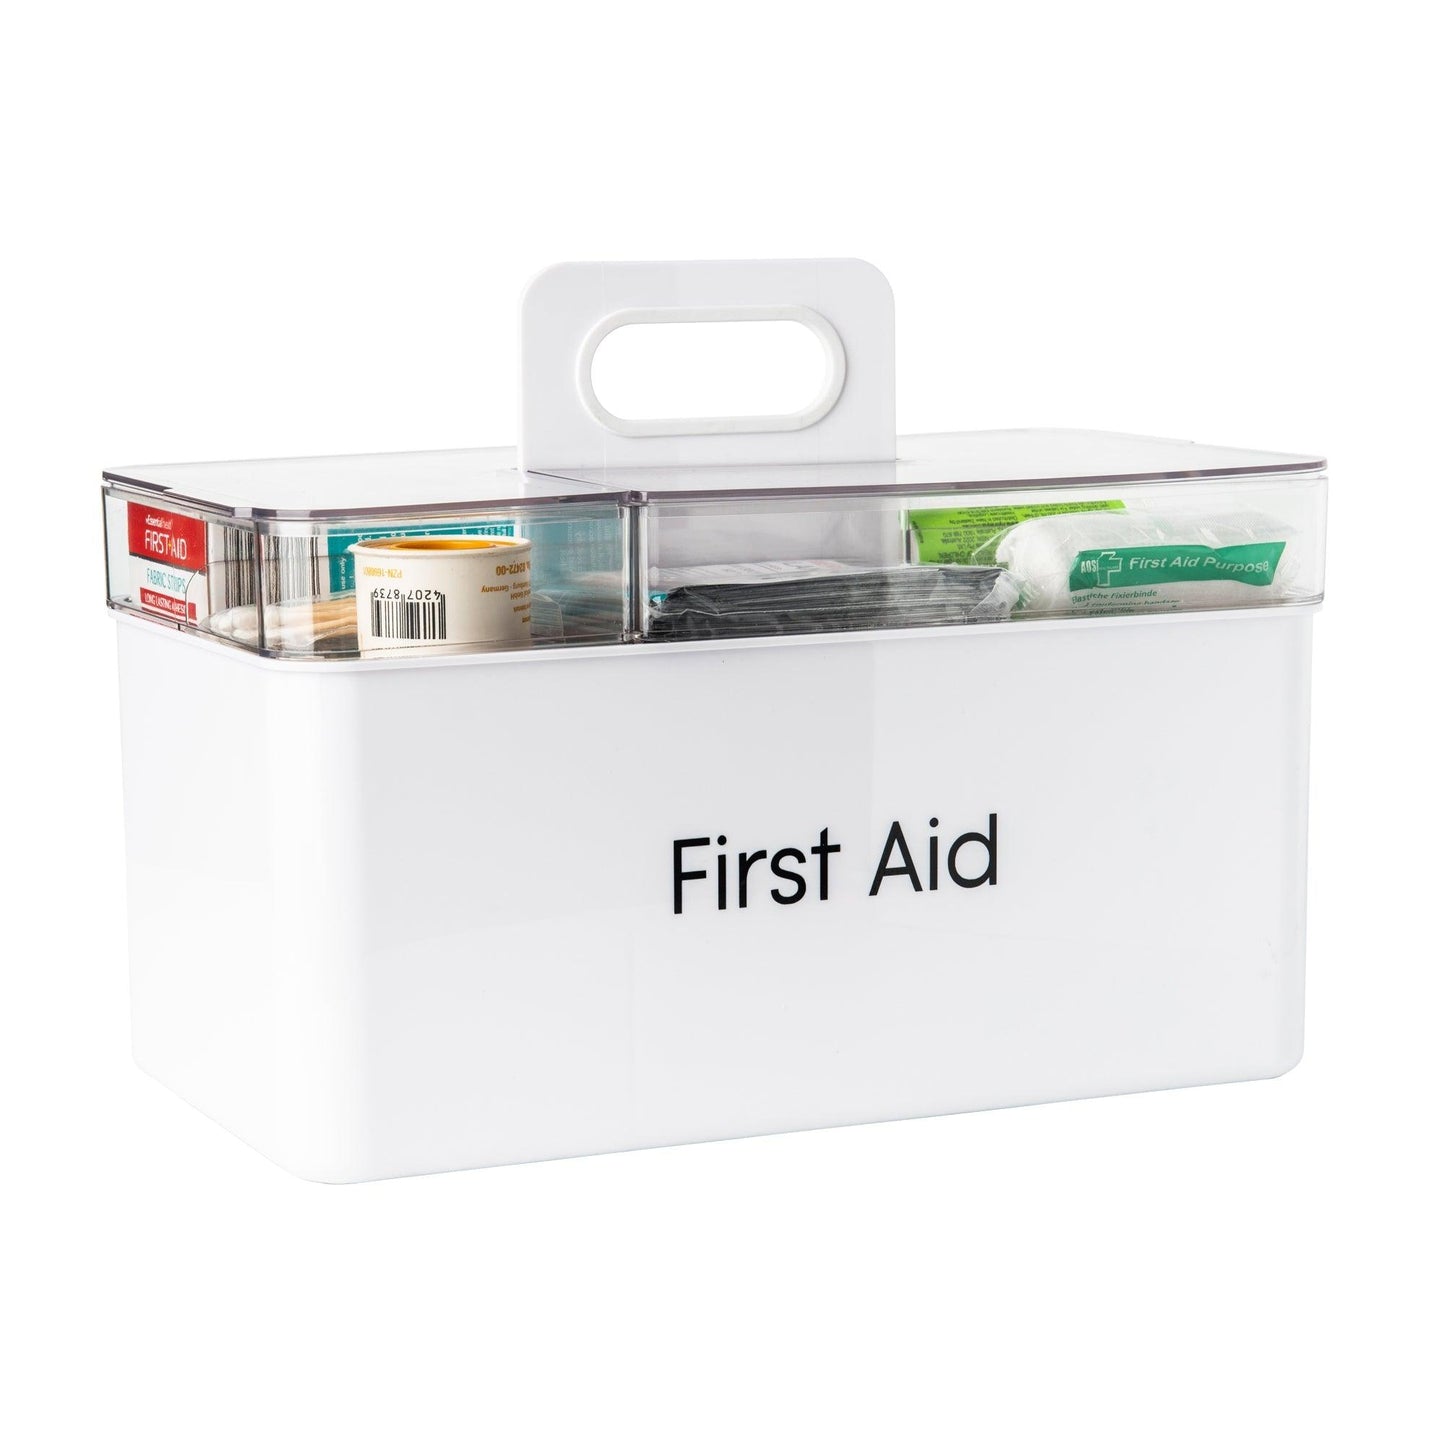 First Aid Organiser - Little Label Co - First Aid Kits - 20%, Catchoftheday